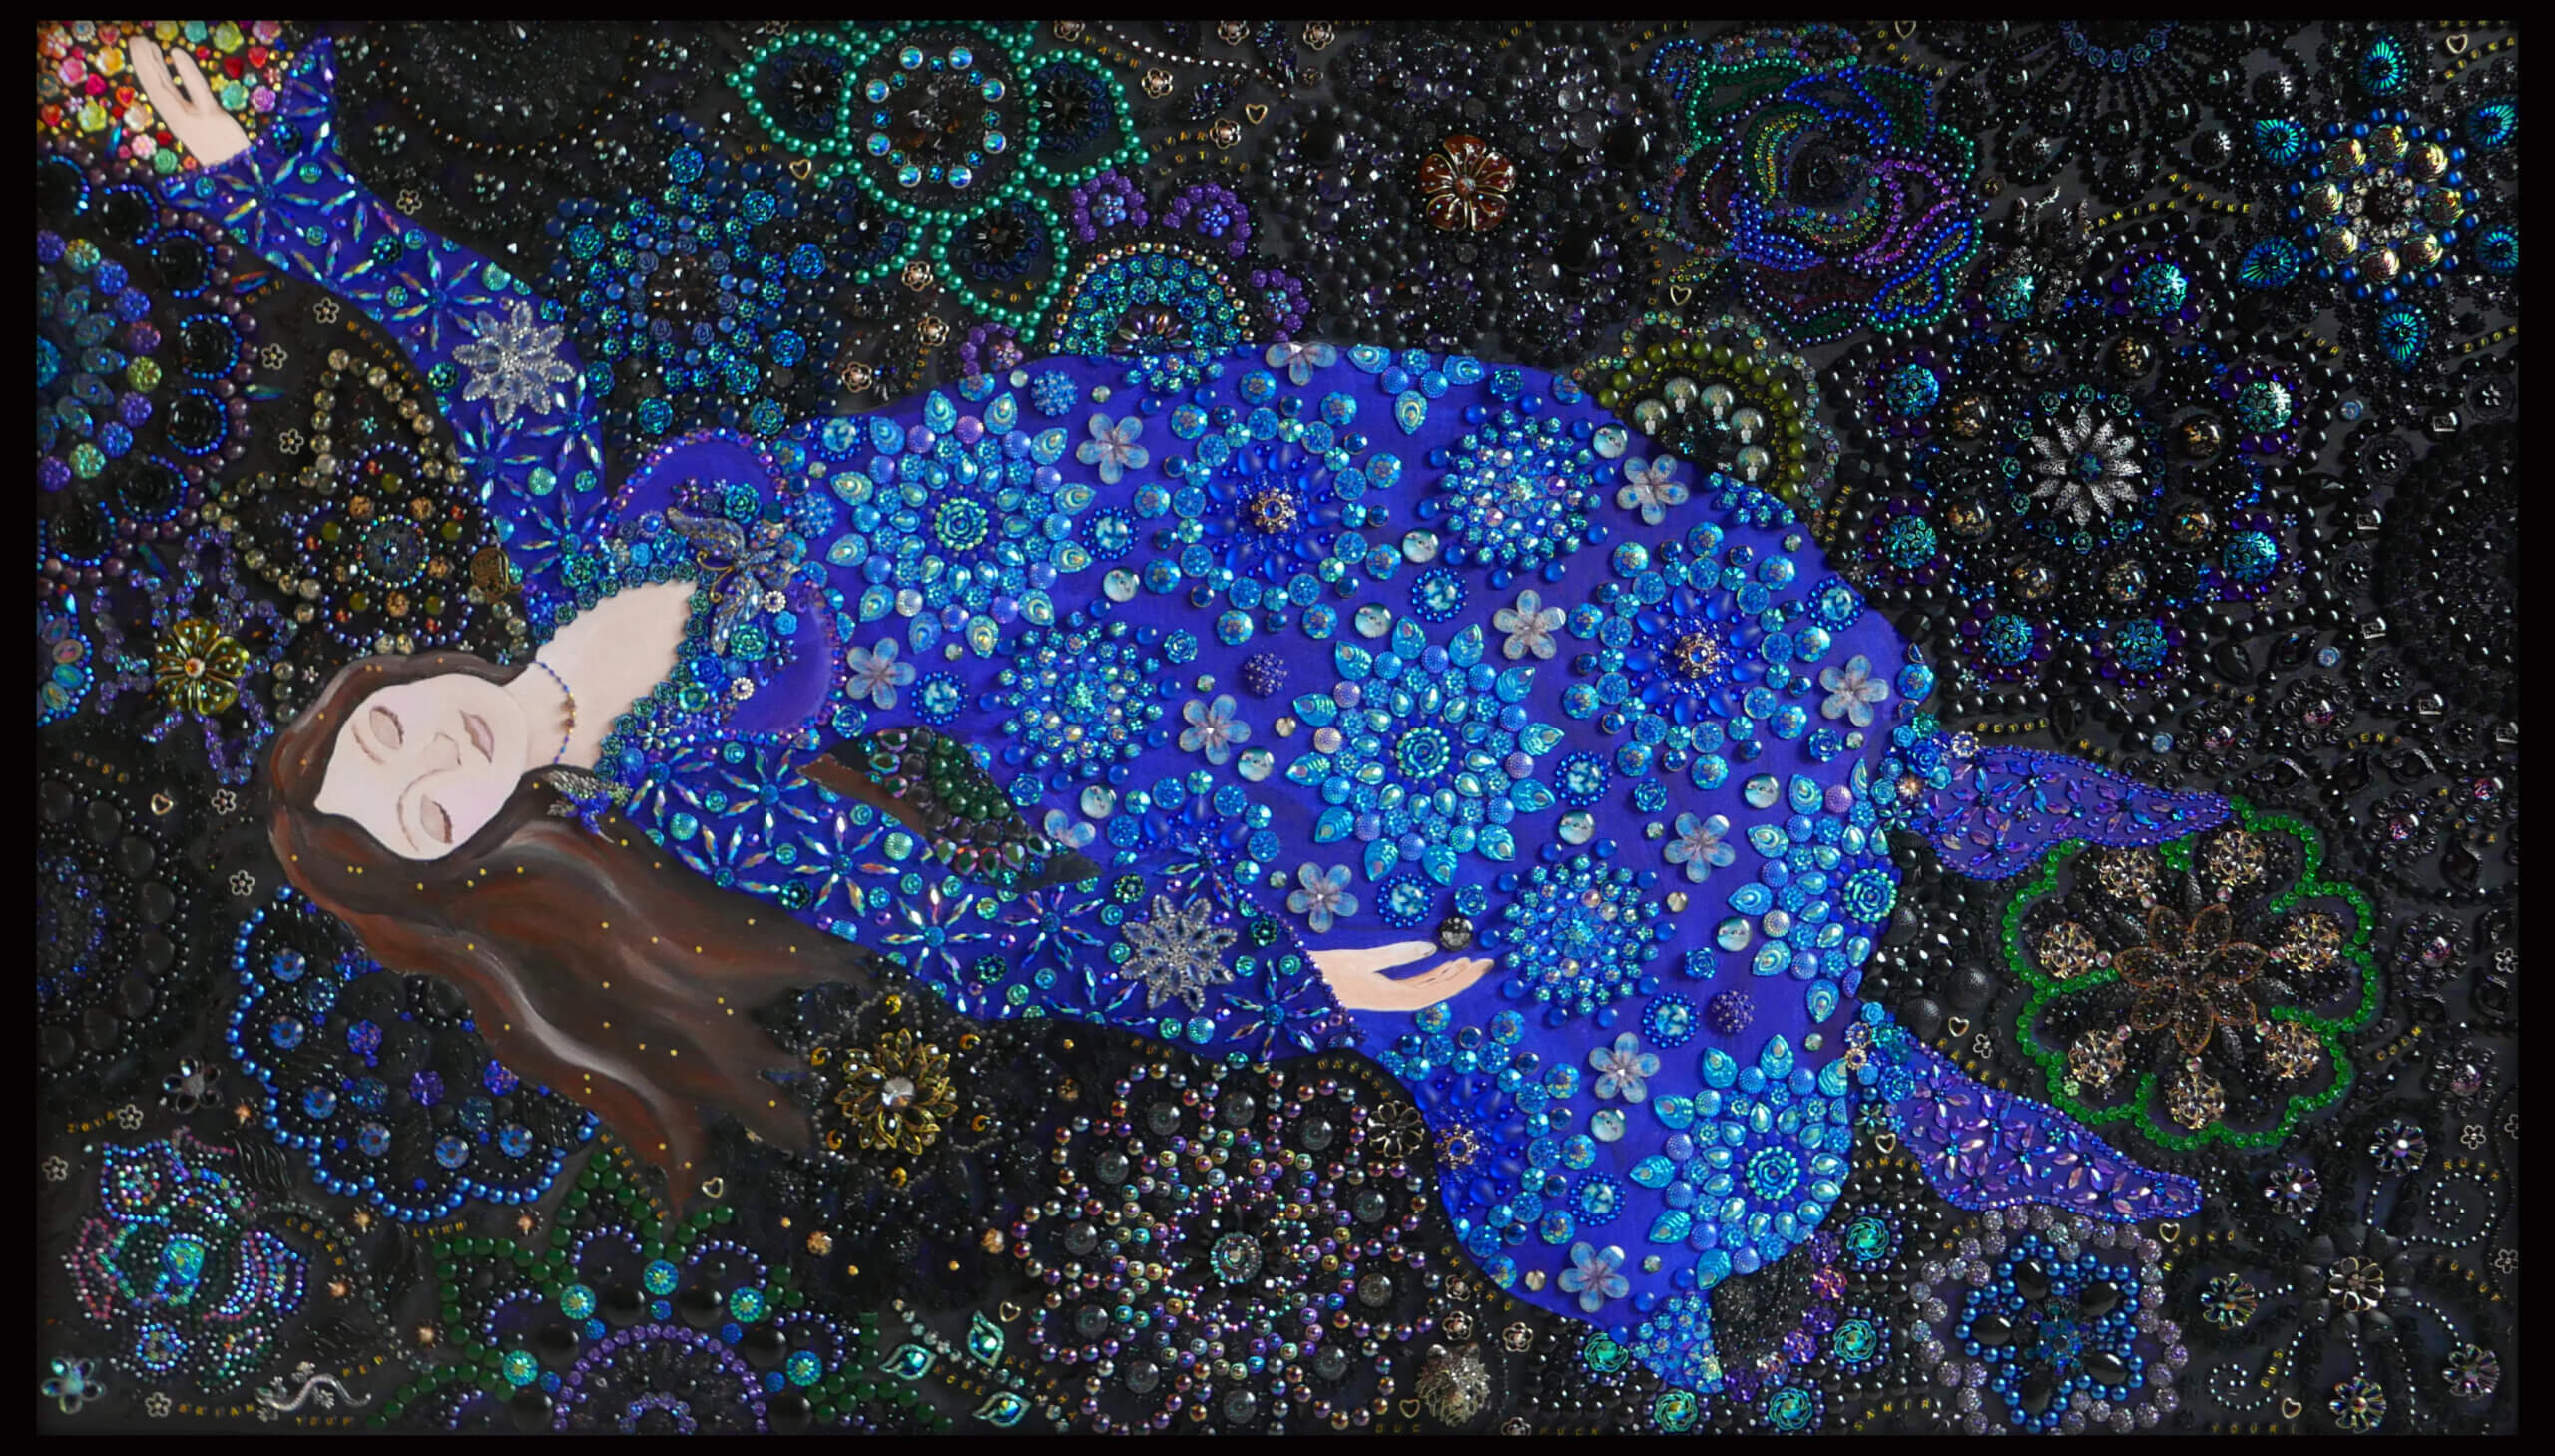 A painting of a woman with long brown hair lying on a beaded black background with a beaded blue dress